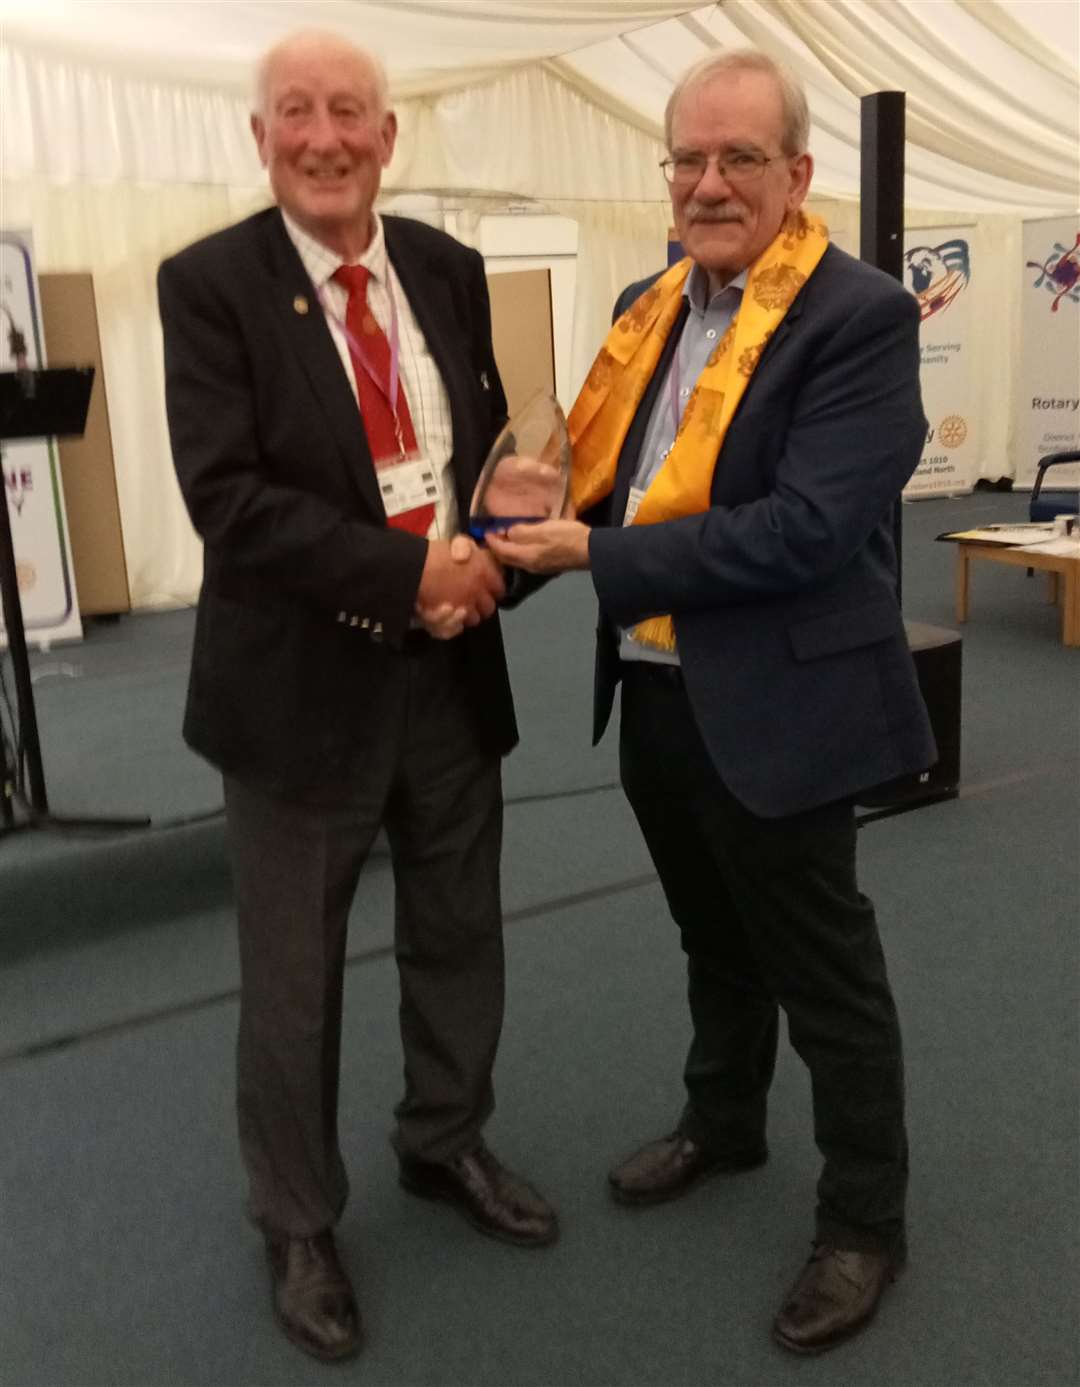 Alistair Risk received the award from Scotland North Rotary district governor Ken McLennan at a district conference last Saturday, June 10, at the Dewar Centre in Perth.